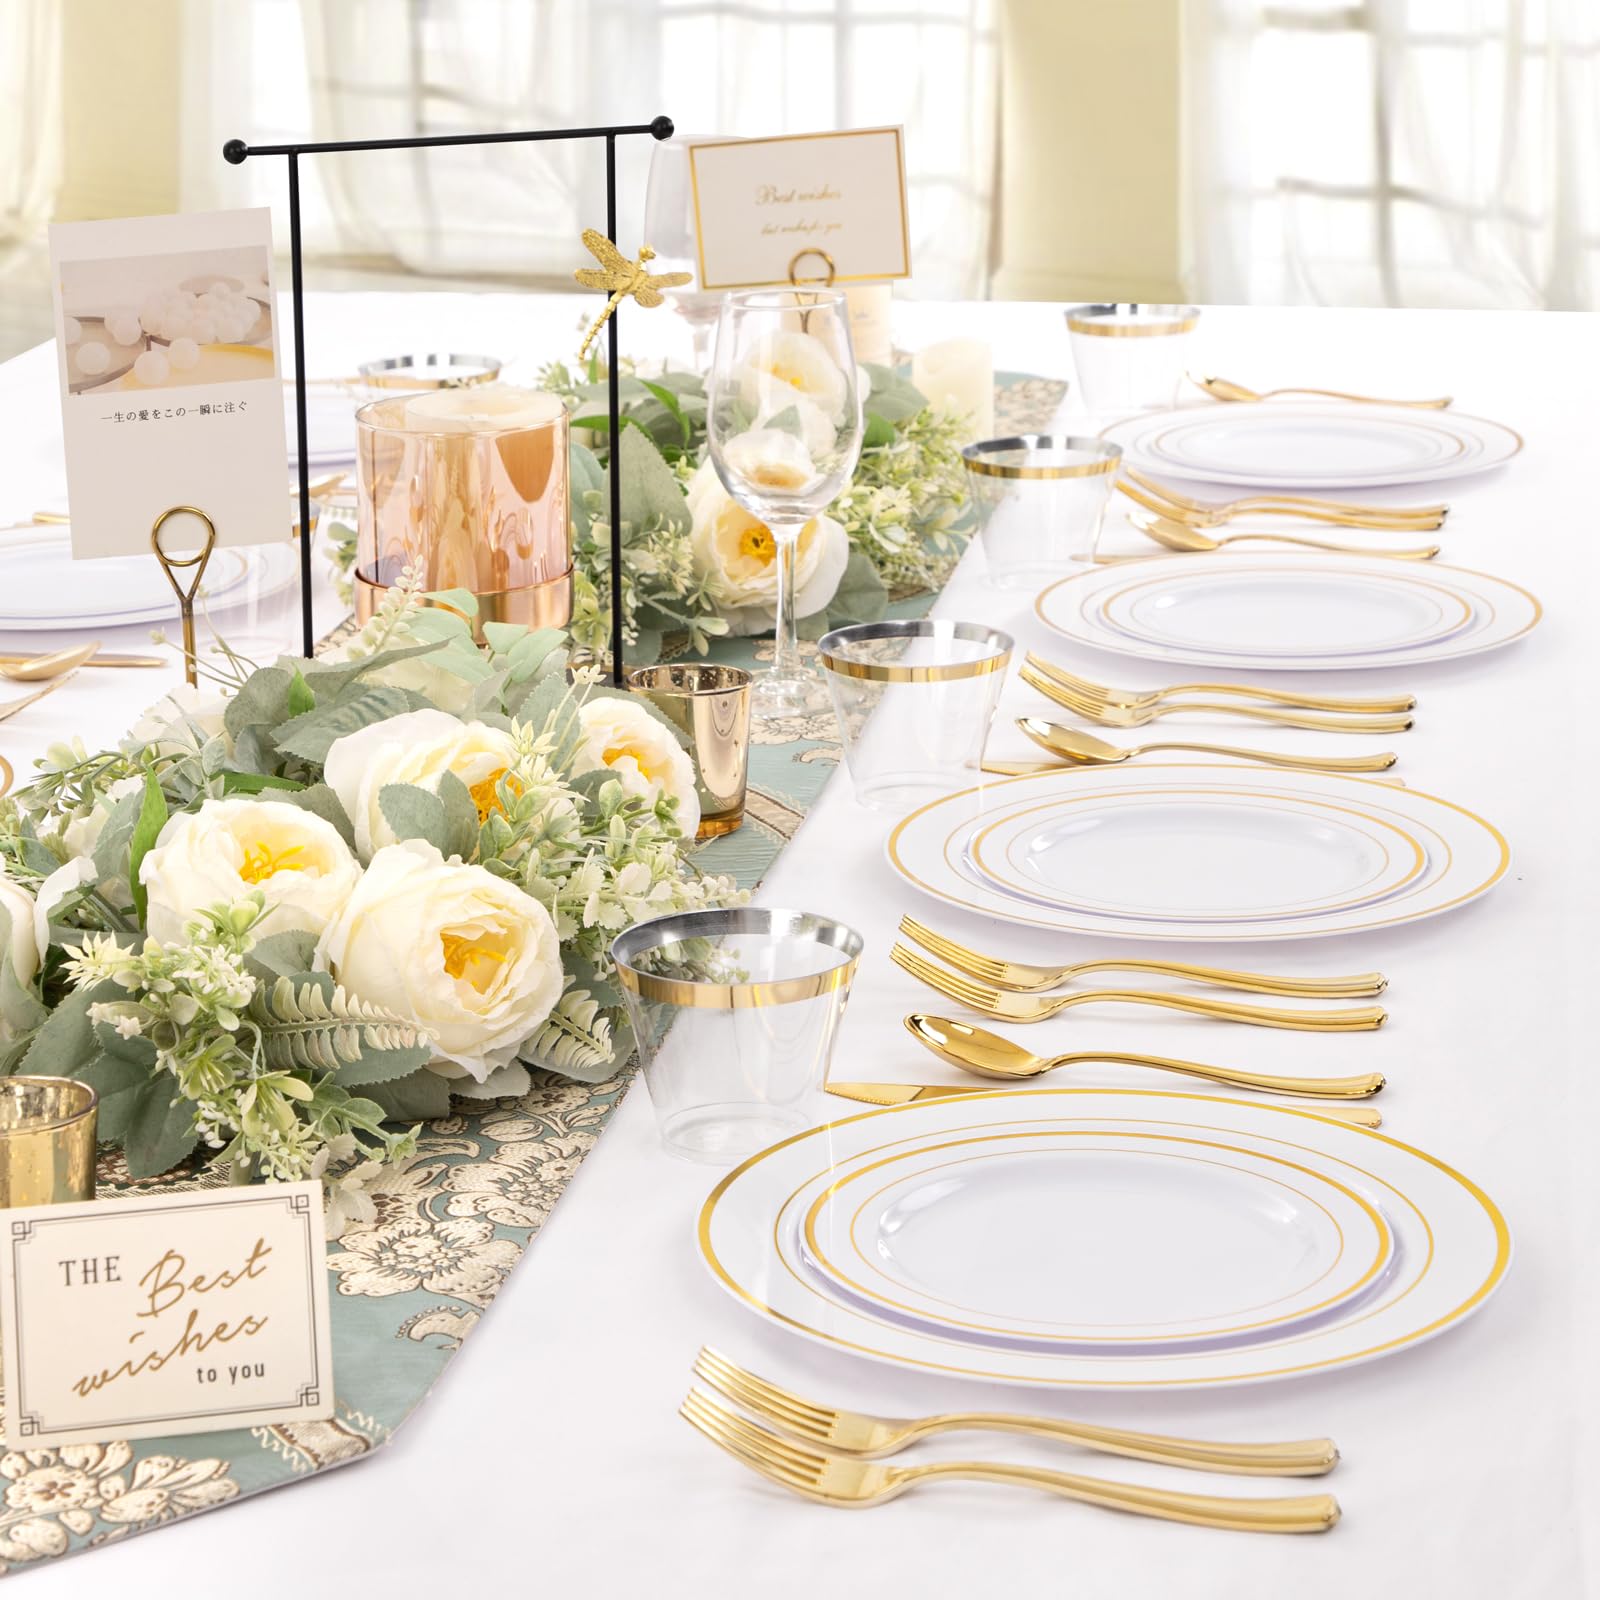 WELLIFE 350 Pieces Gold Plastic Plates with Disposable Silverware and Cups, Include: 50 Dinner Plates 10.25”, 50 Dessert Plates 7.5”, 50 Gold Rim Cups 9 OZ, 50 Gold Cutlery